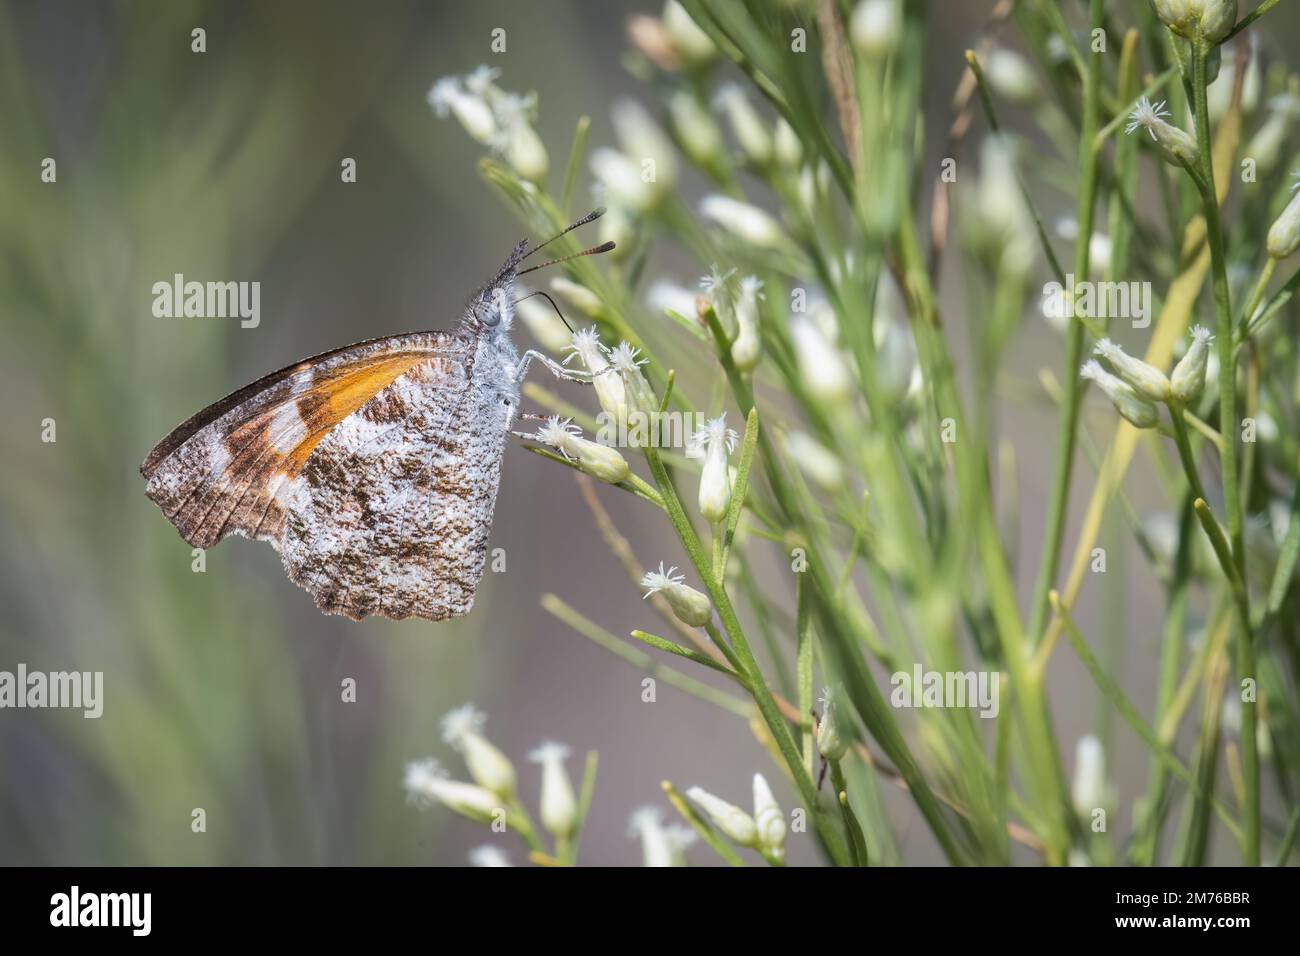 An American snout butterfly feeds on a budding baccharis plant during a migration at Stone Oak Park in San Antonio, Texas. Stock Photo